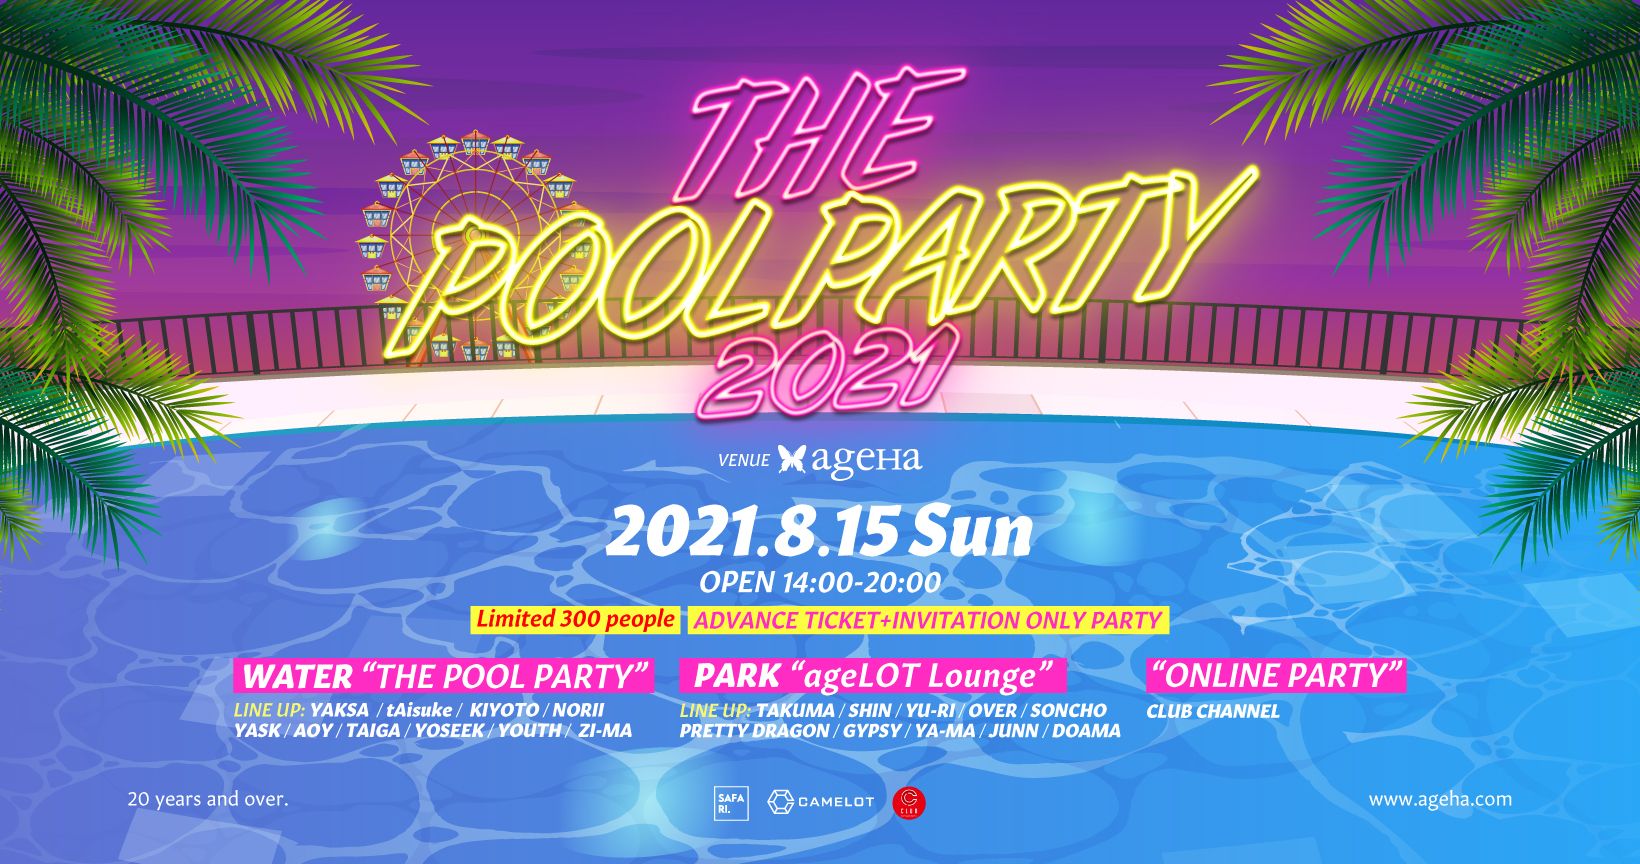 THE POOL PARTY 2021【※開催内容変更】